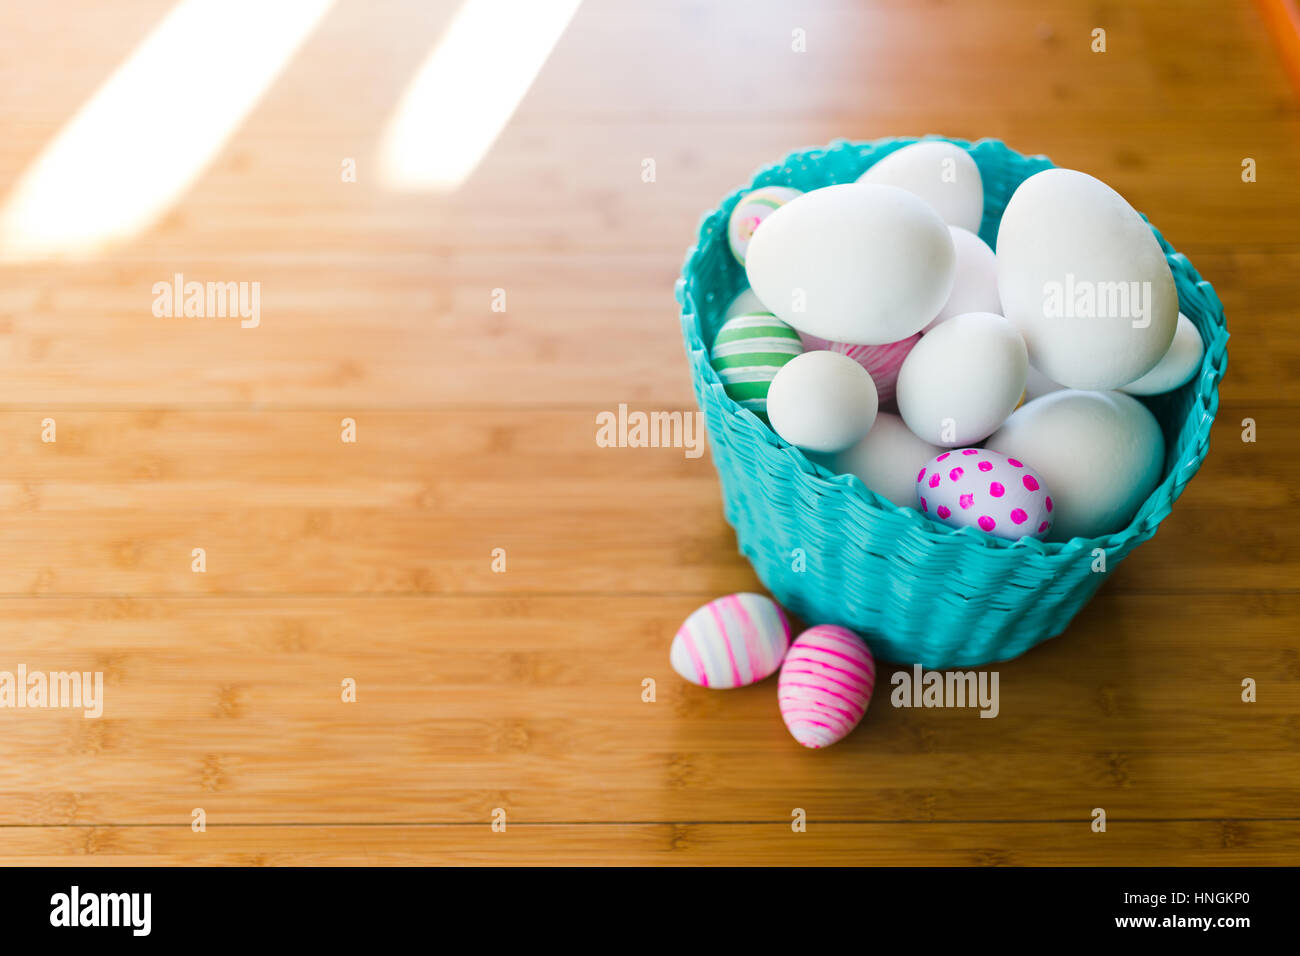 Easter basket with eggs on a wooden floor Stock Photo